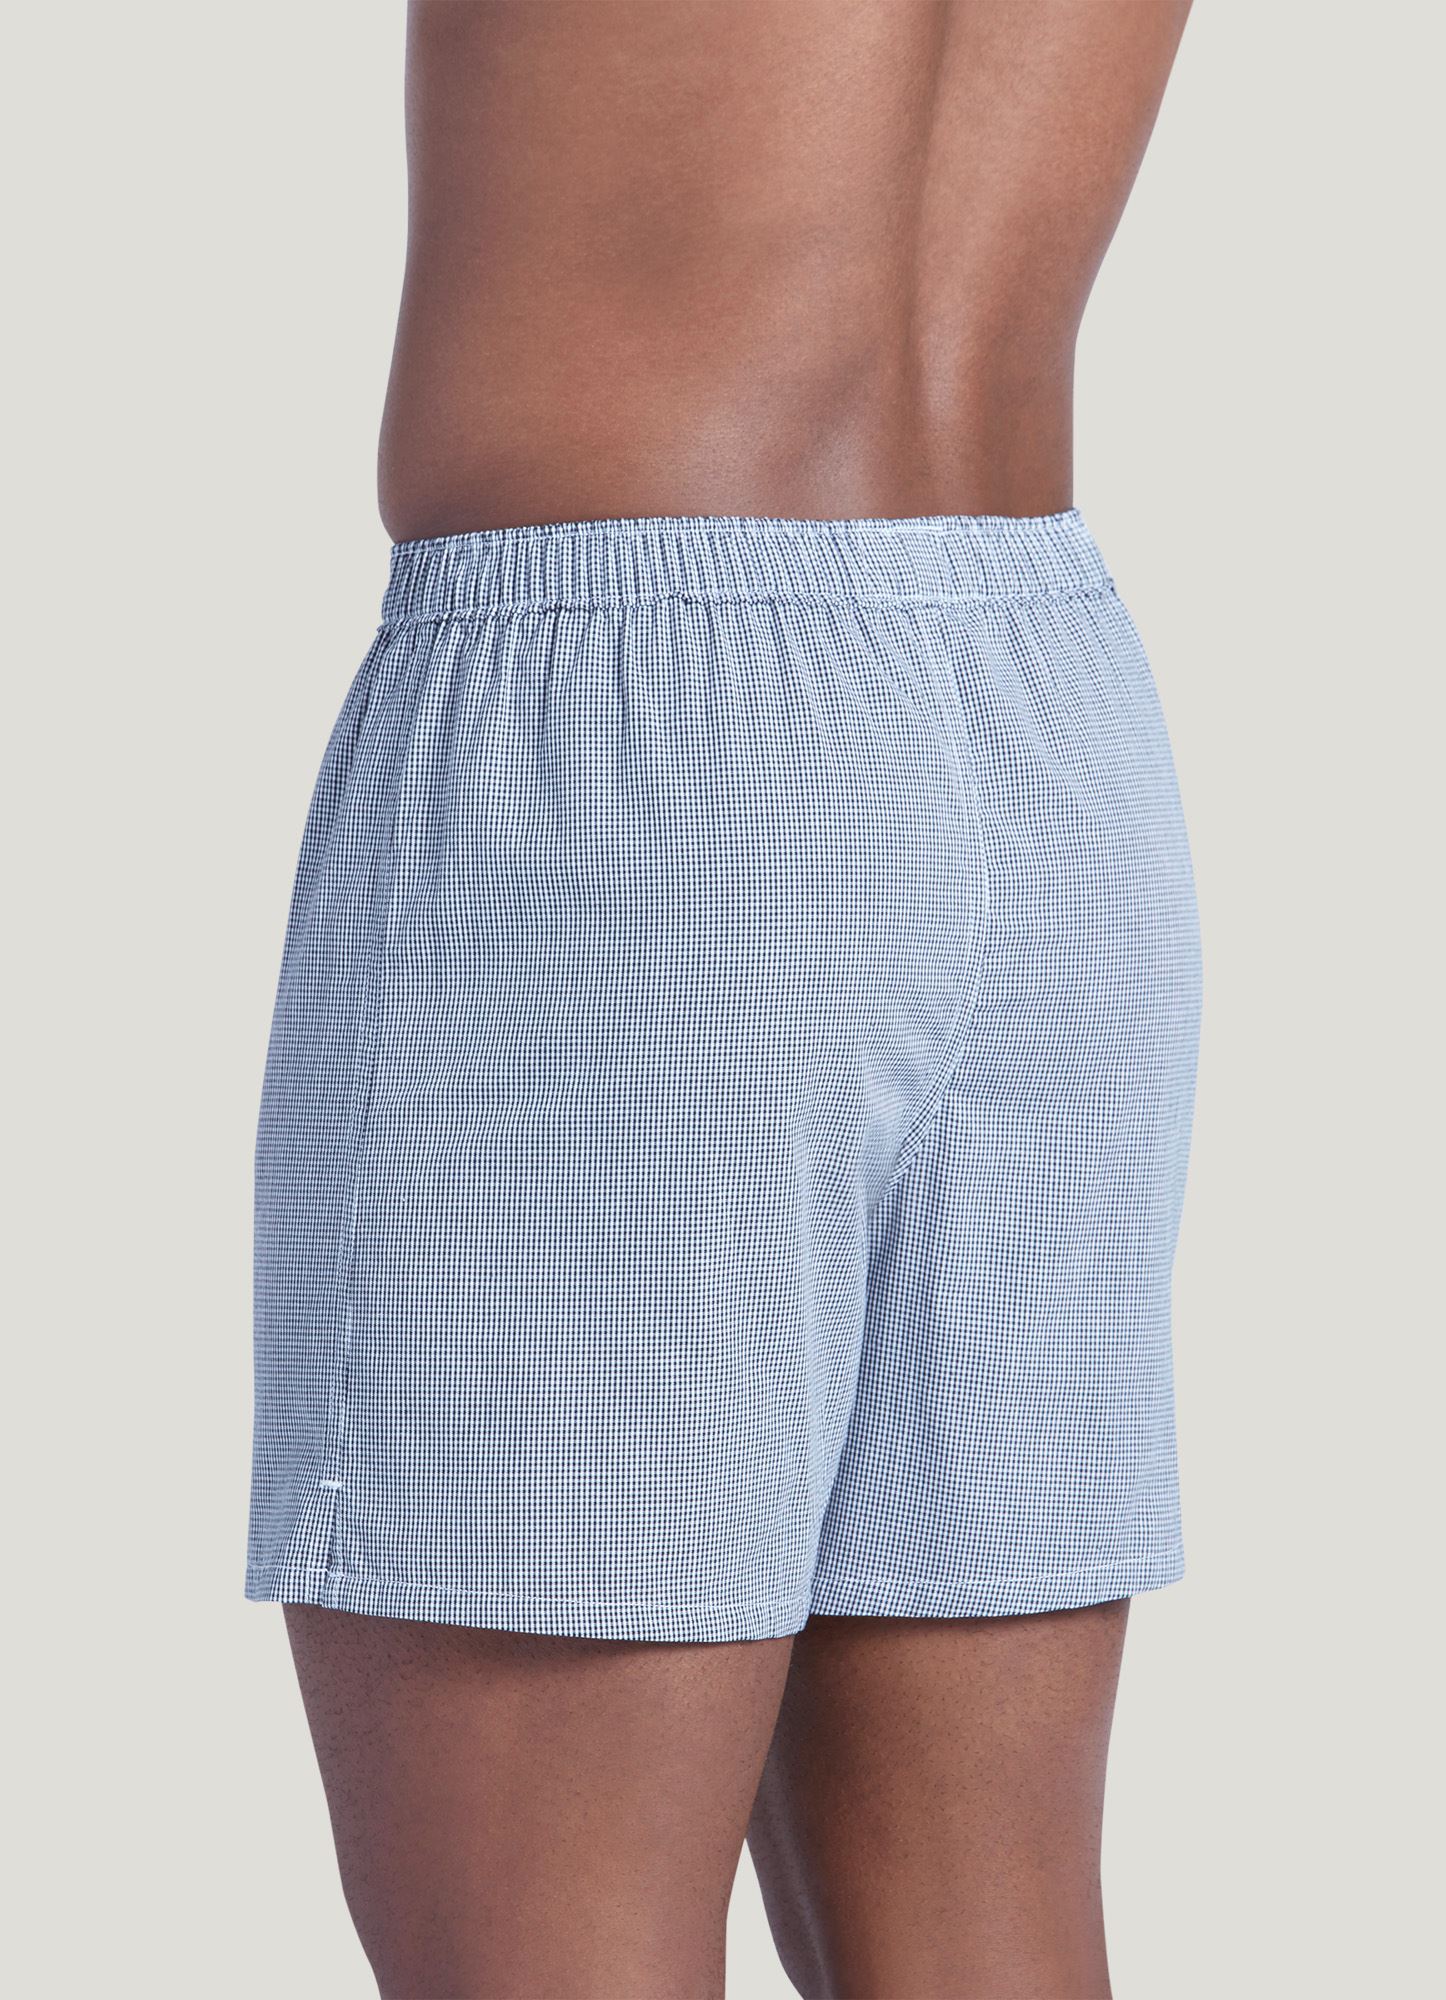 Plain Dyed 100% Pure Cotton Grey Color Jockey Boxer Brief Mens Underwear at  Best Price in Jodhpur